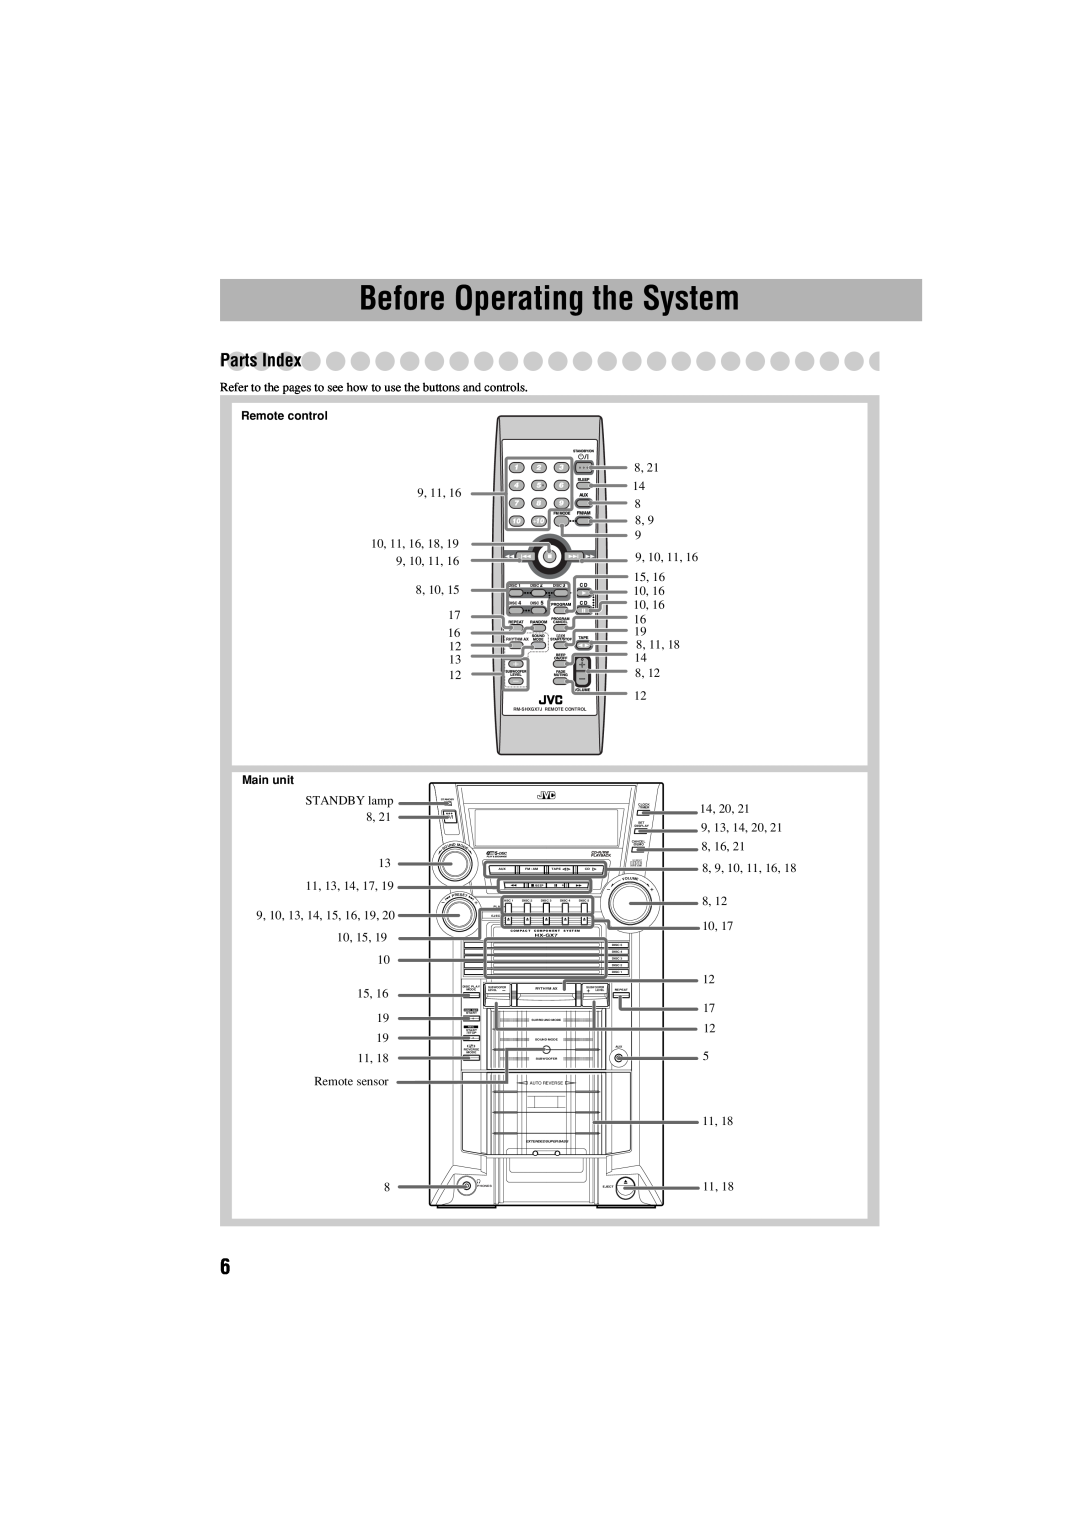 JVC HX-GX7 manual Before Operating the System, Parts Index, Remote control, Main unit 